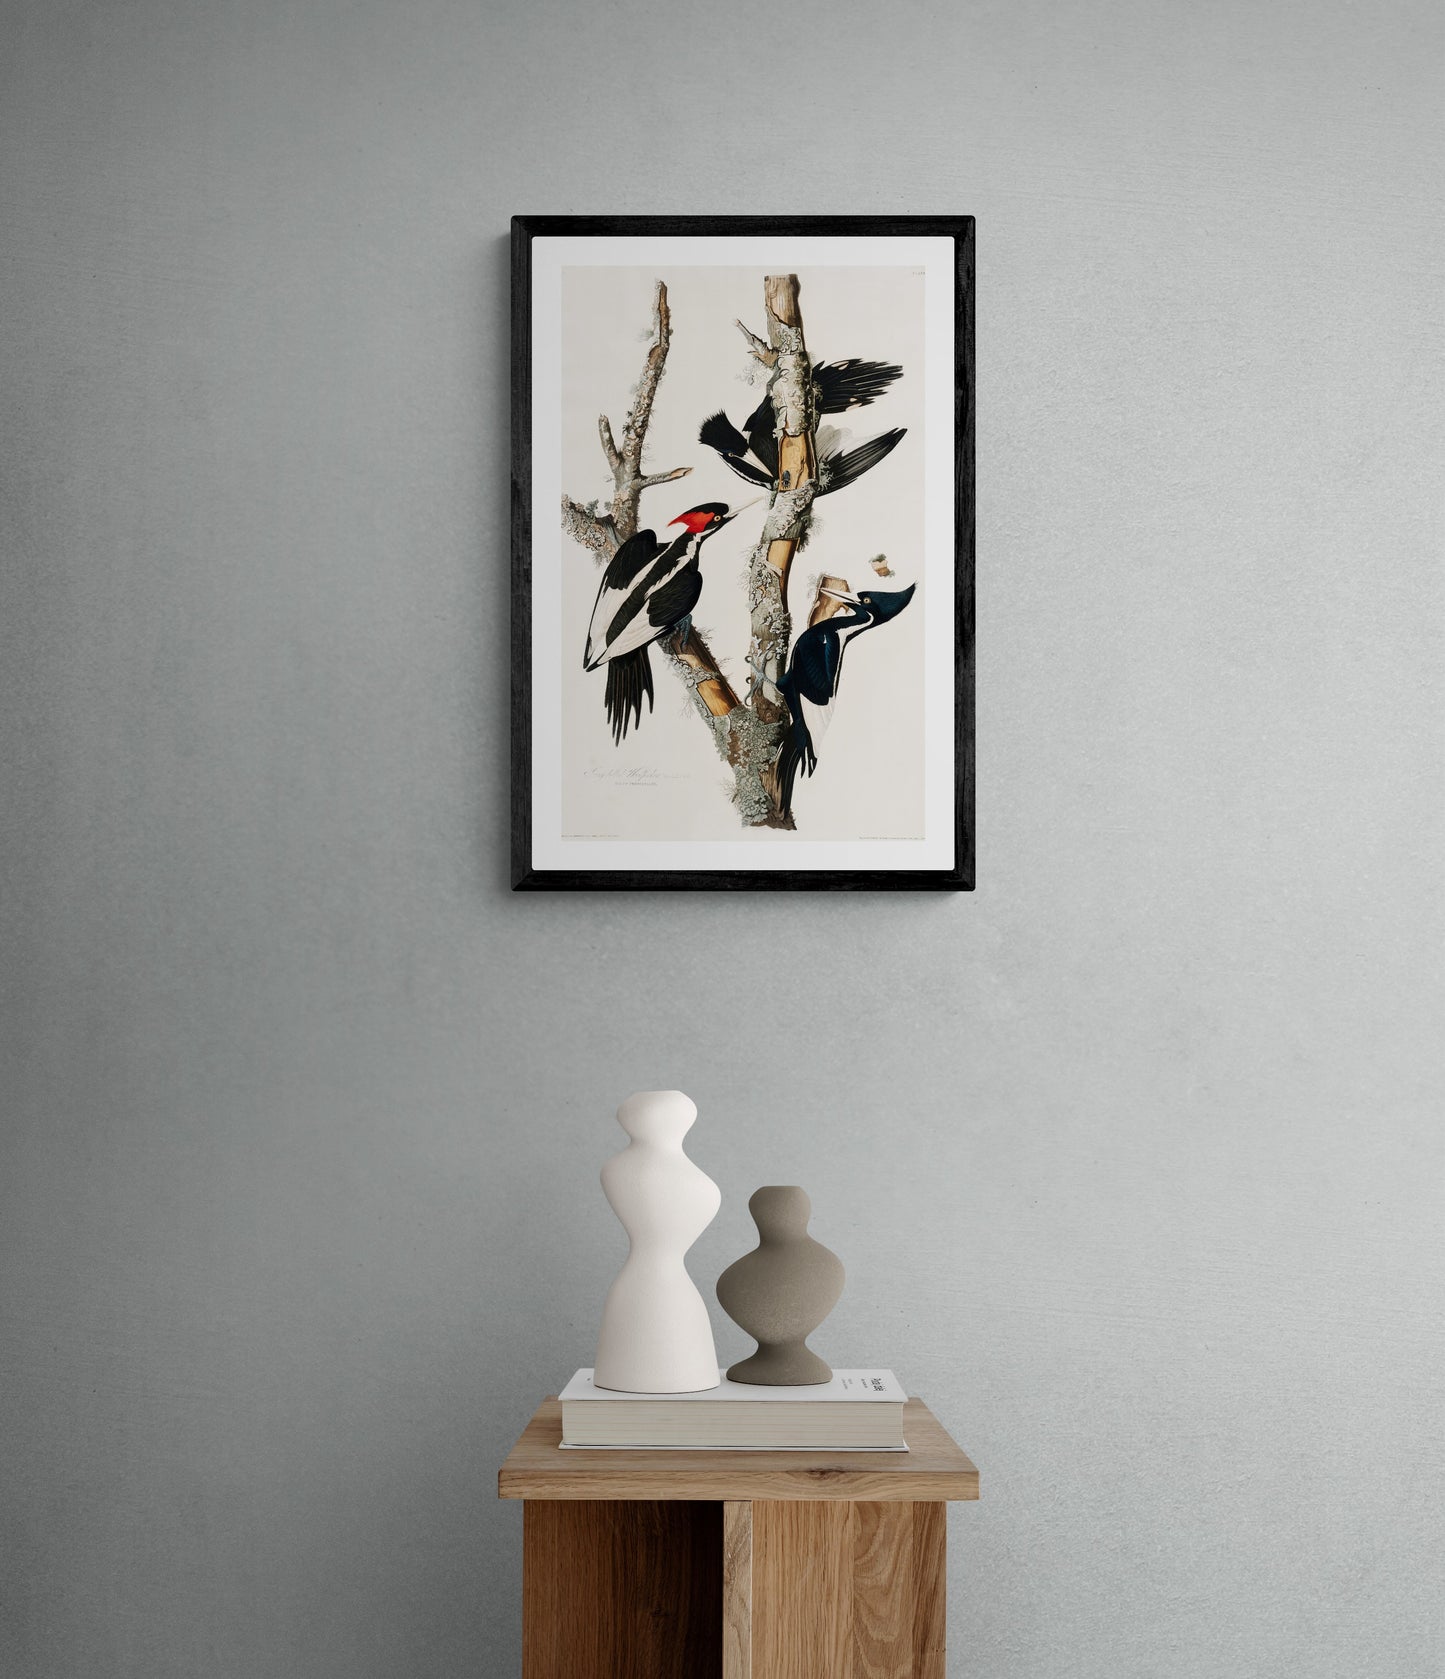 Vintage naturalistic bird illustrations: Ivory-billed Woodpecker. Prints on art paper, canvas, and framed canvas. Free shipping in the USA. SKUJJA073